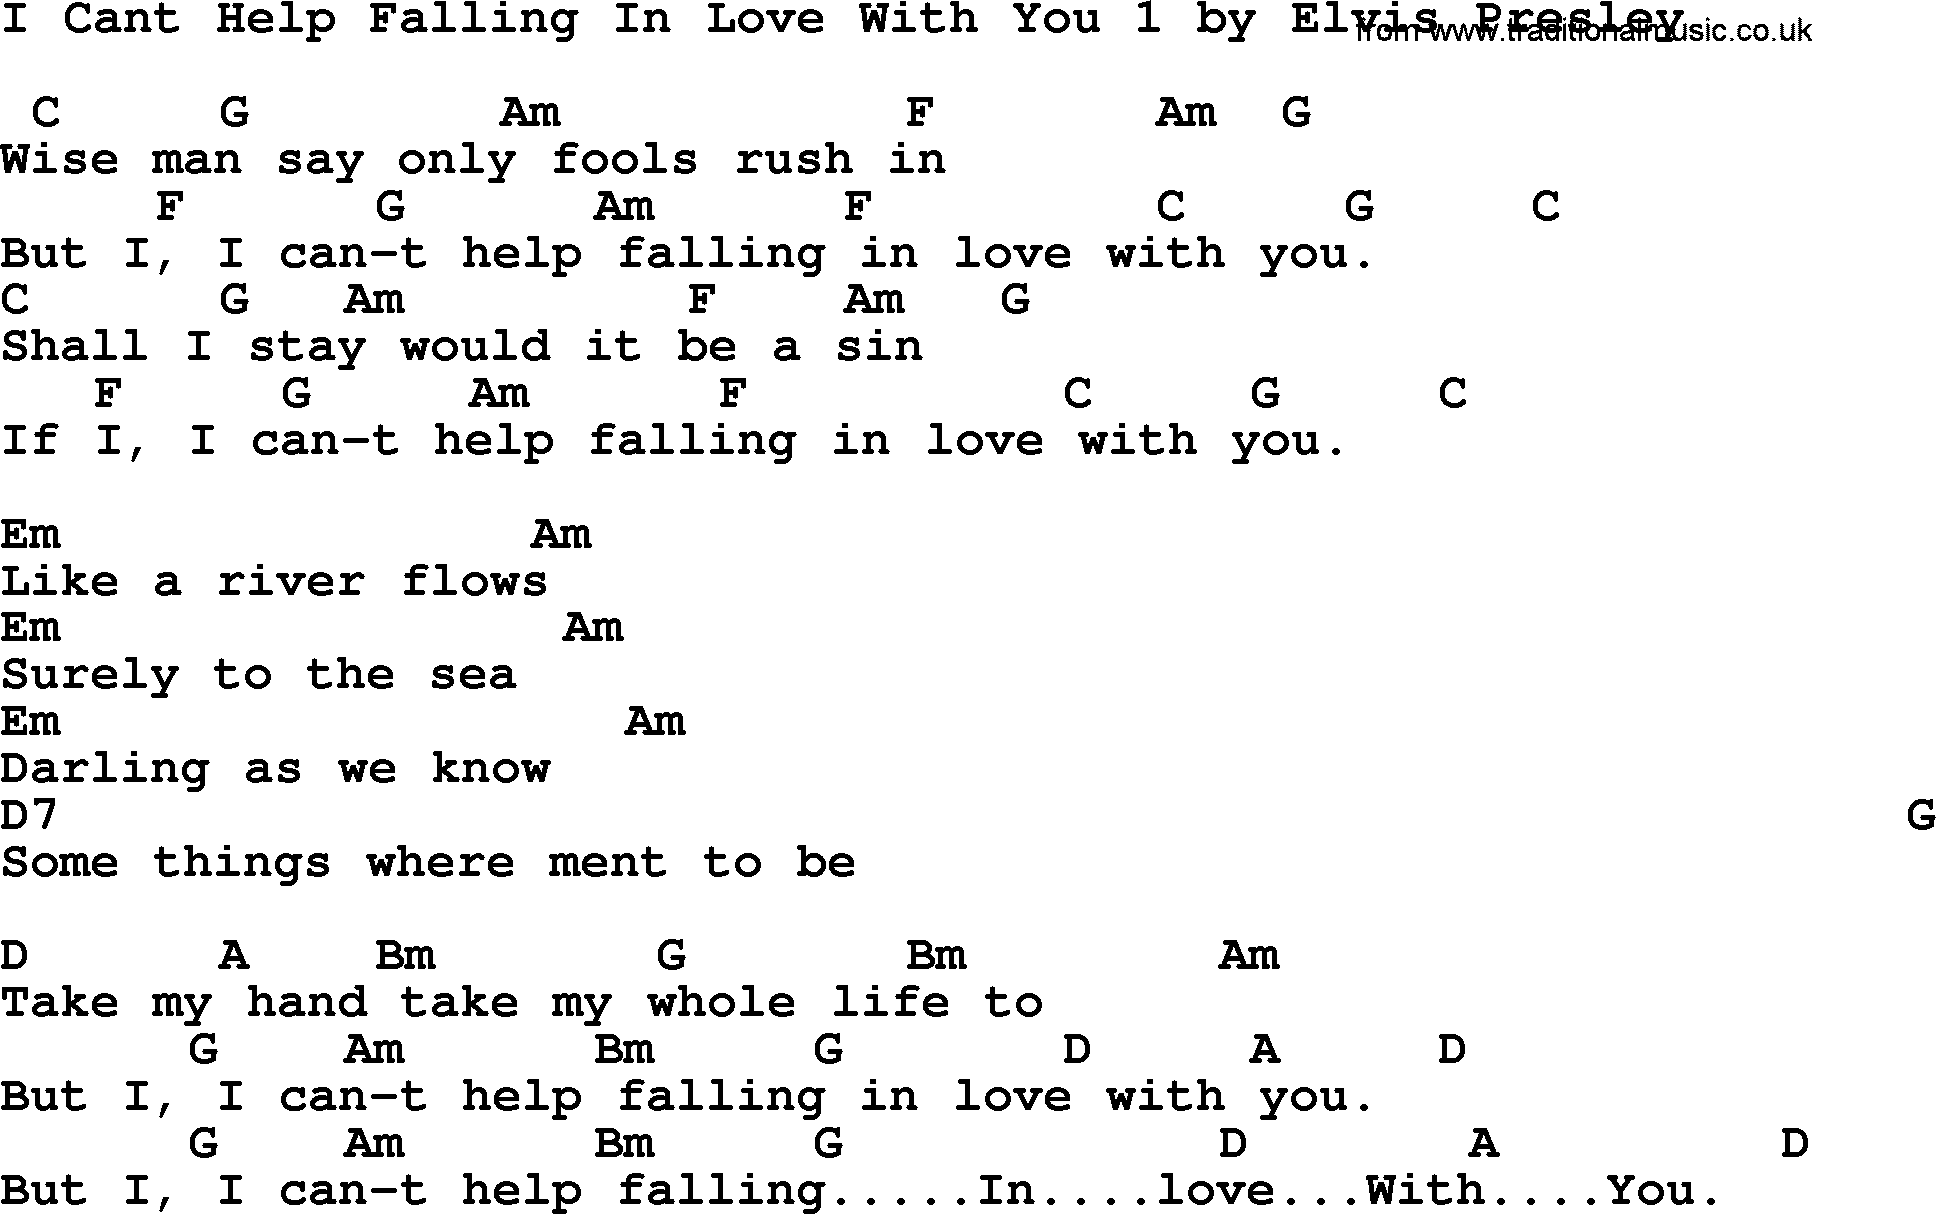 I Cant Help Falling Love With 1, Elvis Presley - lyrics and chords